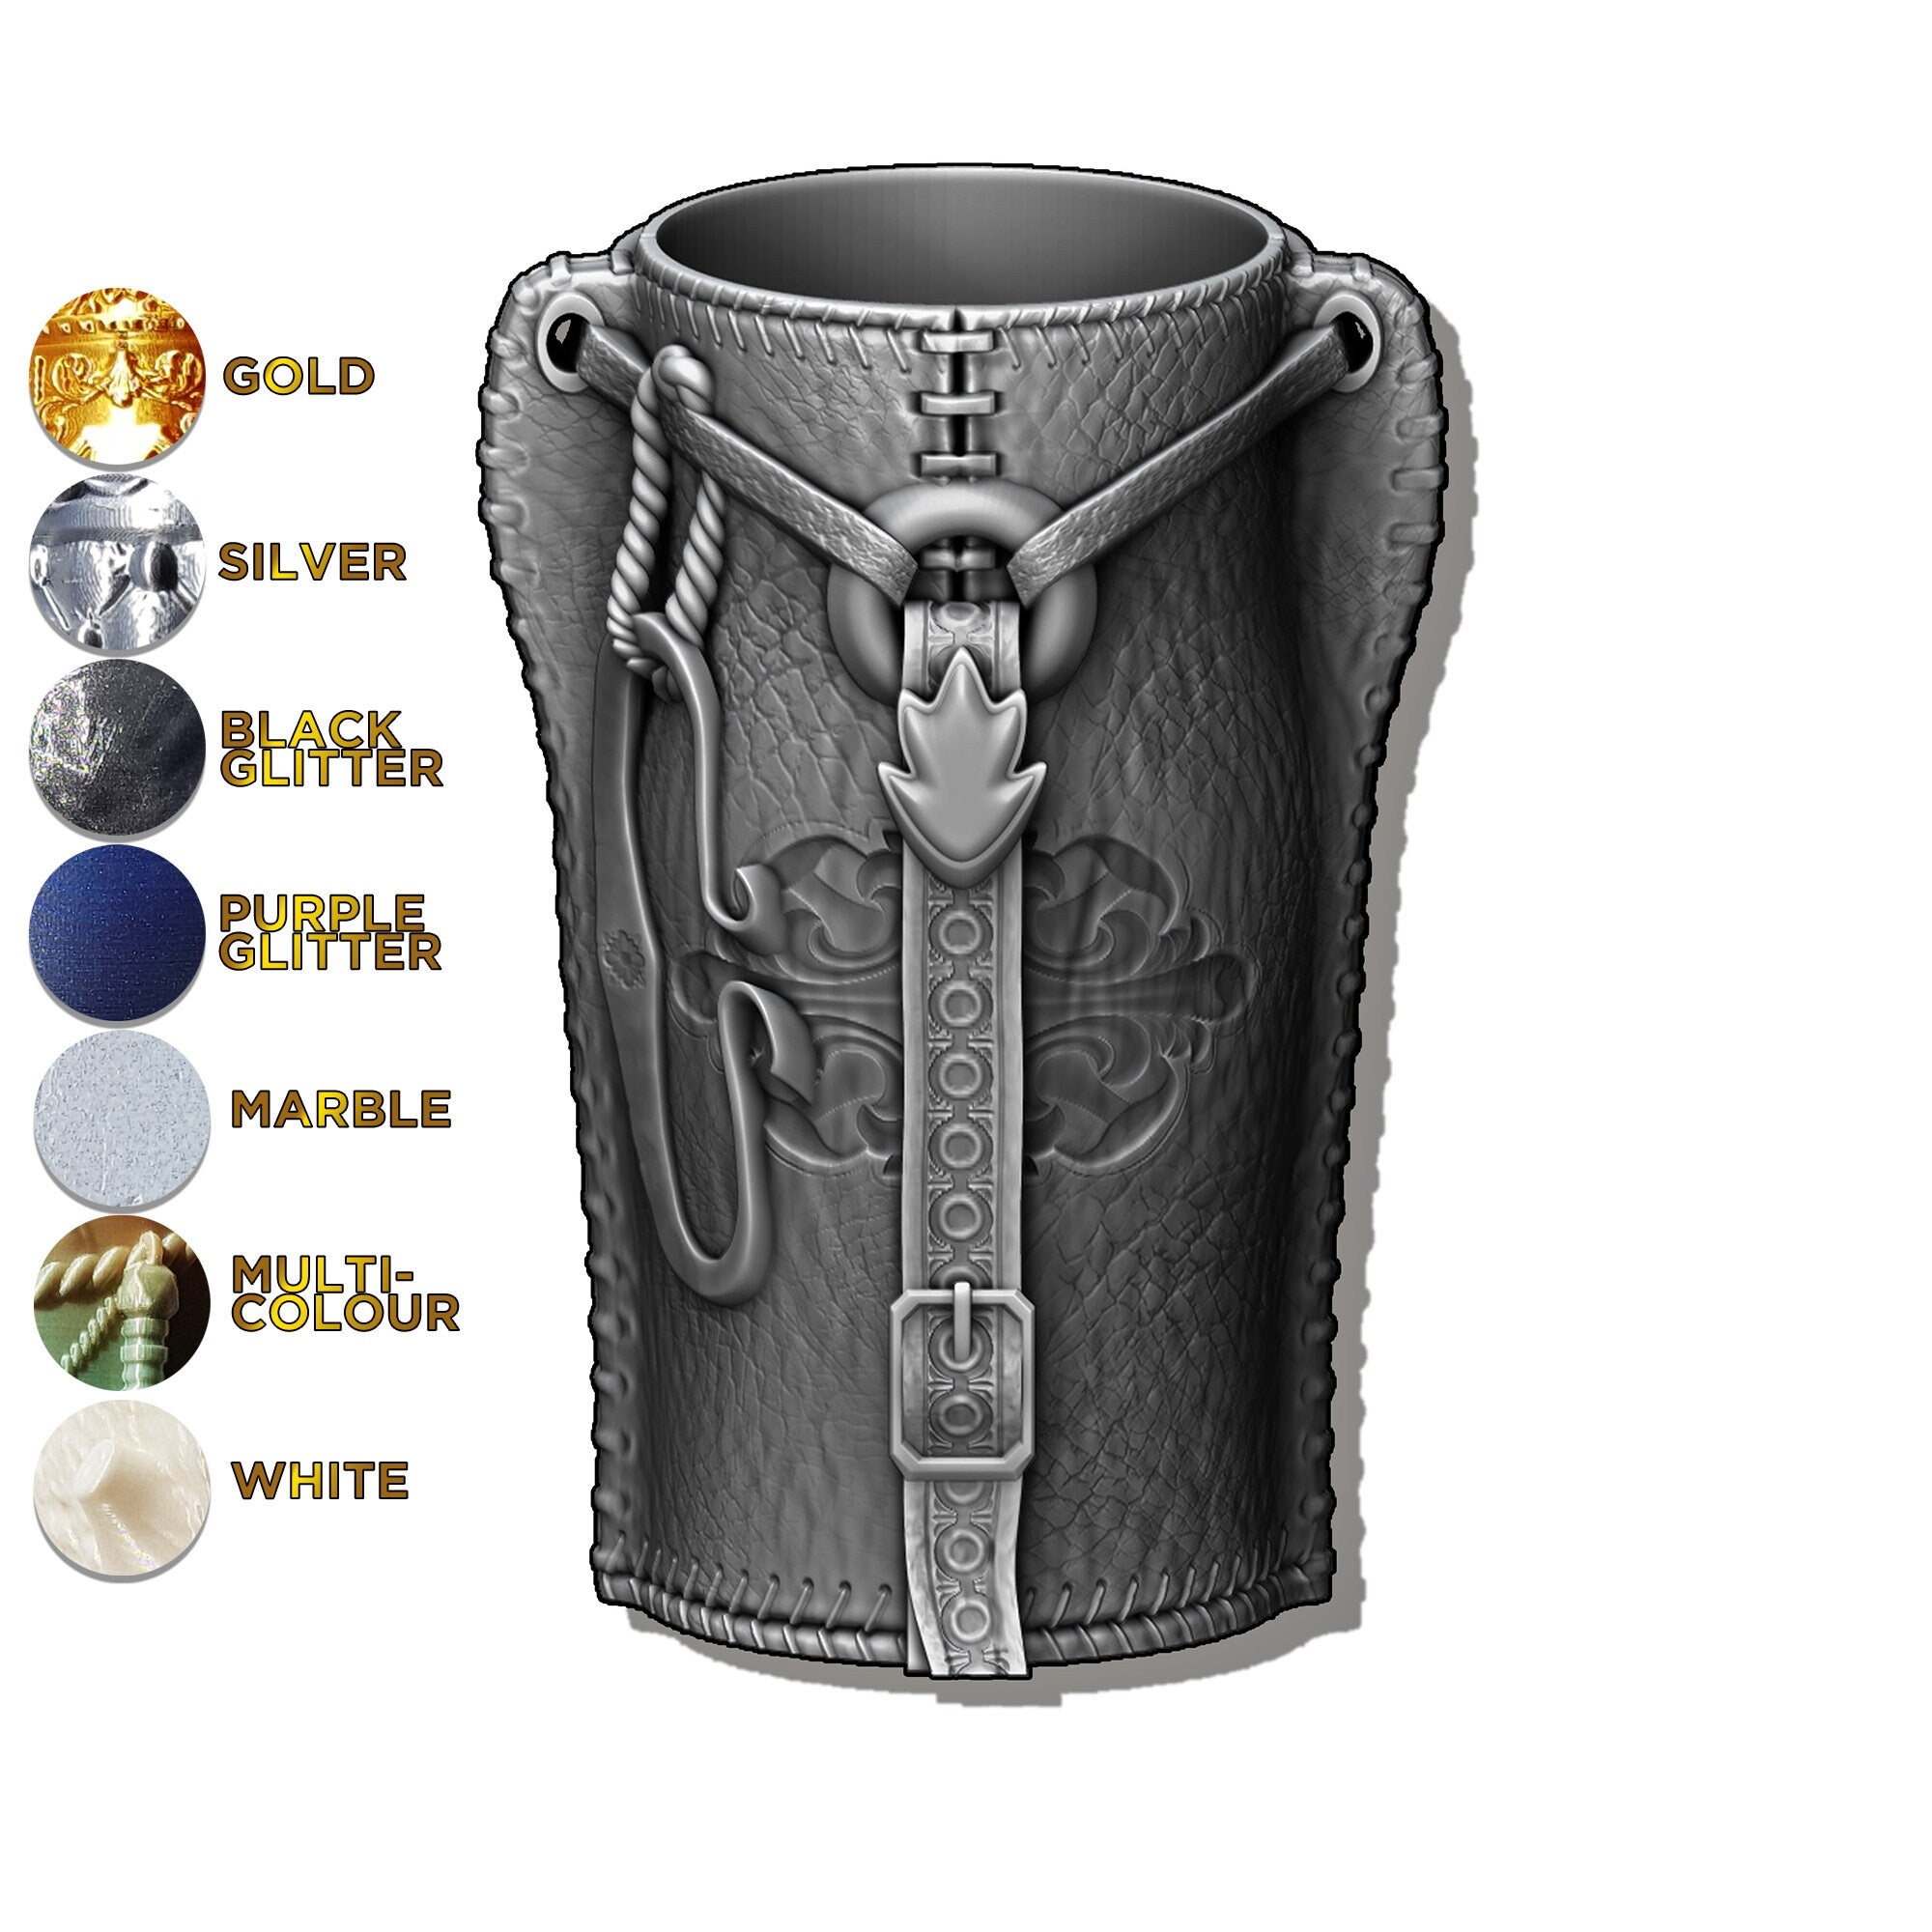 The RANGER | Mythic Mug | Larp | Gaming Zubehör | Tabletop | Dice Cup | Box | Holder | Dungeons and Dragons | DnD | RPG | Fantasy-Role Playing Games